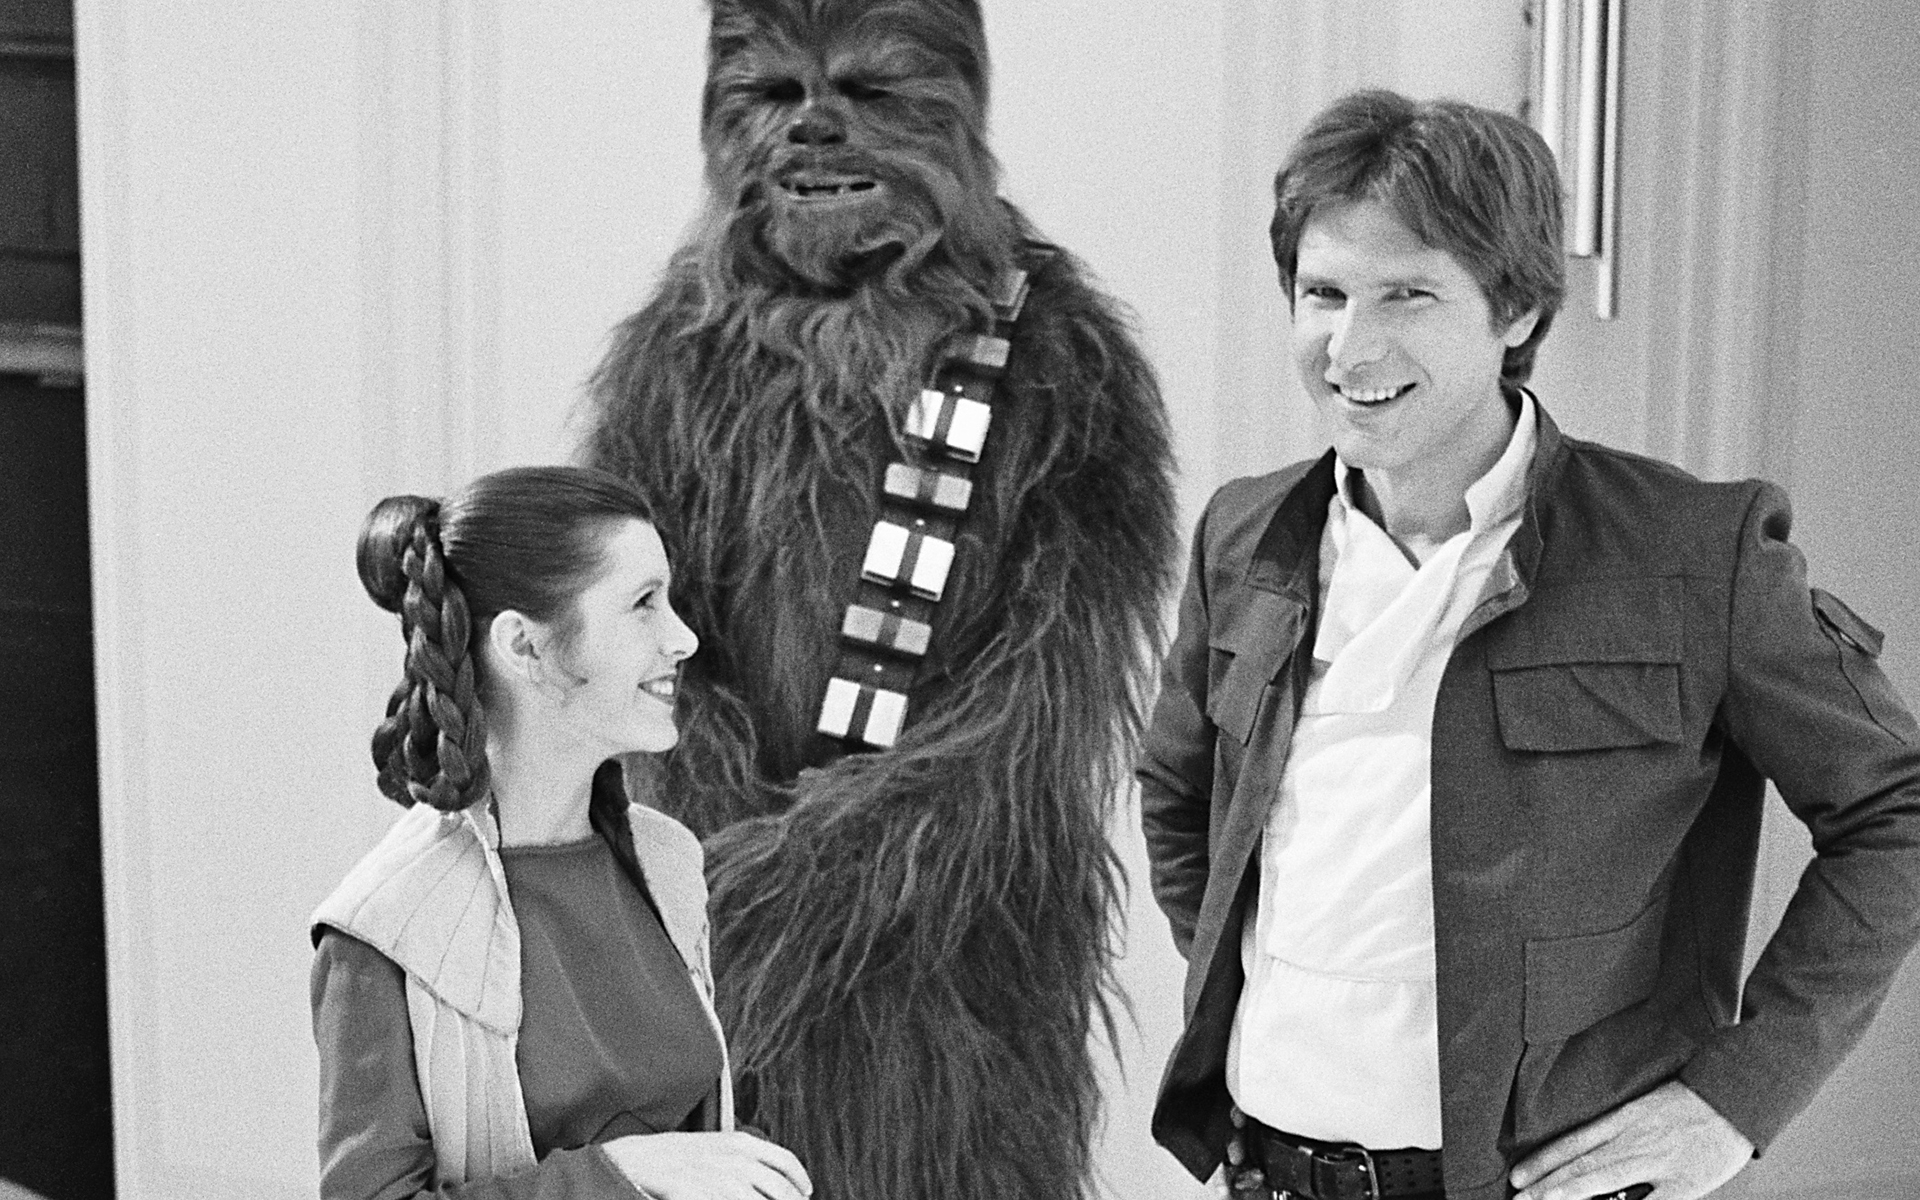 star, Wars, Han, Solo, Harrison, Ford, Chewbacca, Bw, Carrie, Fisher, Princess, Leia, Sci fi, Movies, Black, White, Classic, Wookie, People, Men, Males, Wmone, Females, Babes, Actor, Actress Wallpaper